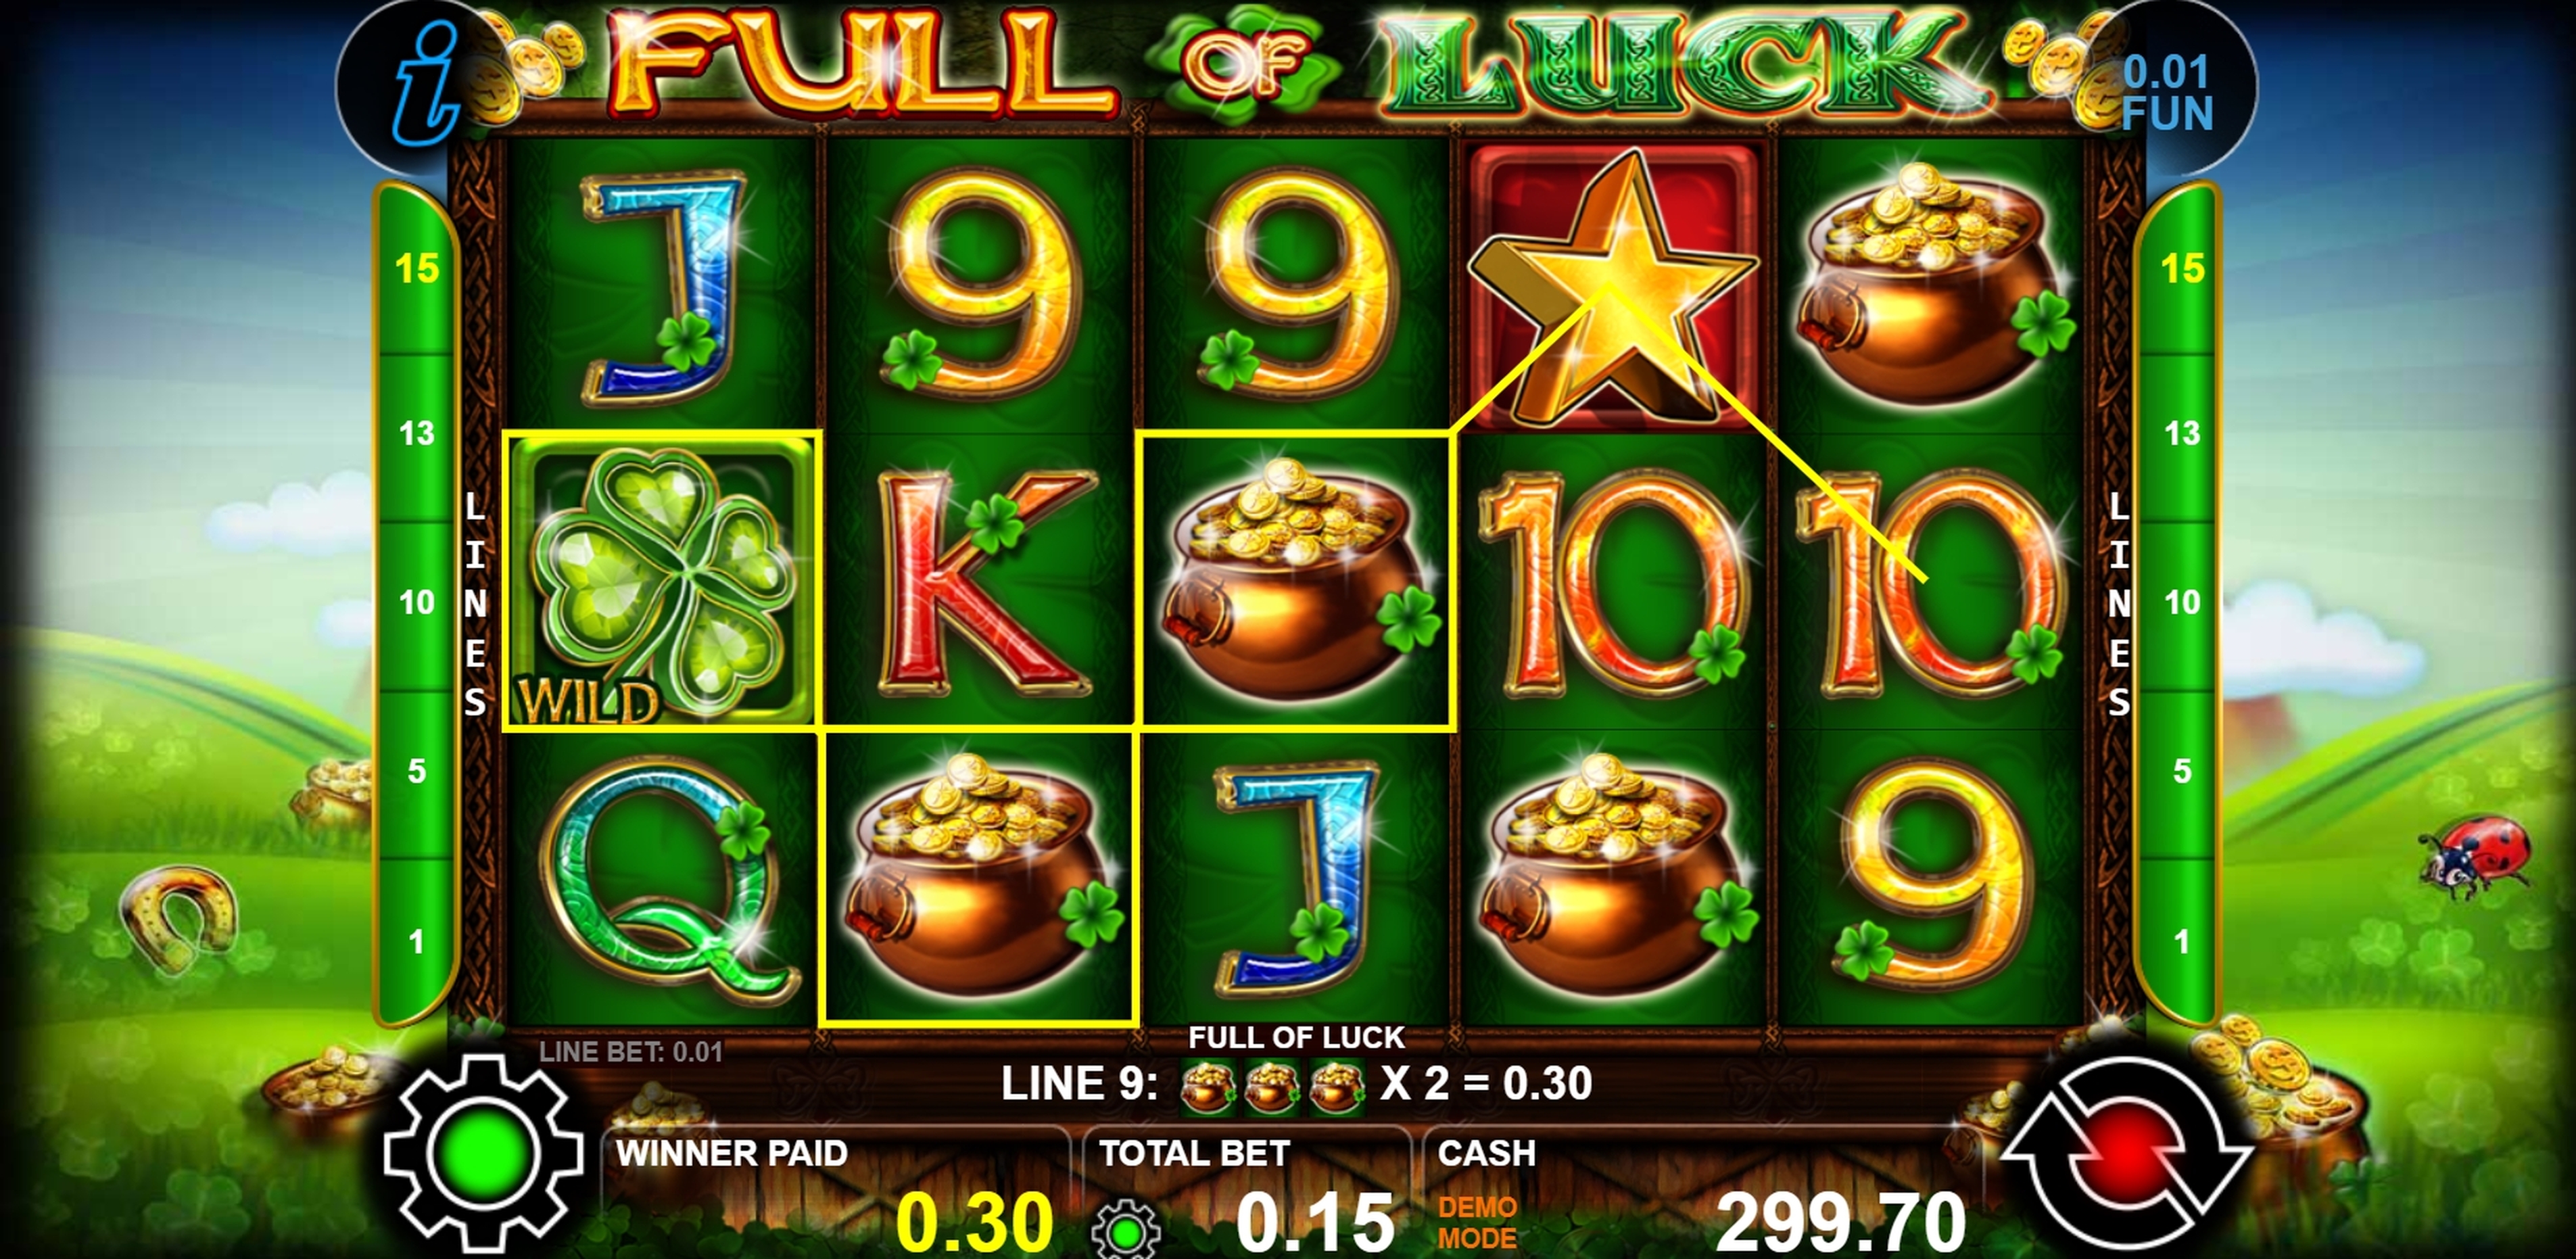 Win Money in Full Of Luck Free Slot Game by casino technology